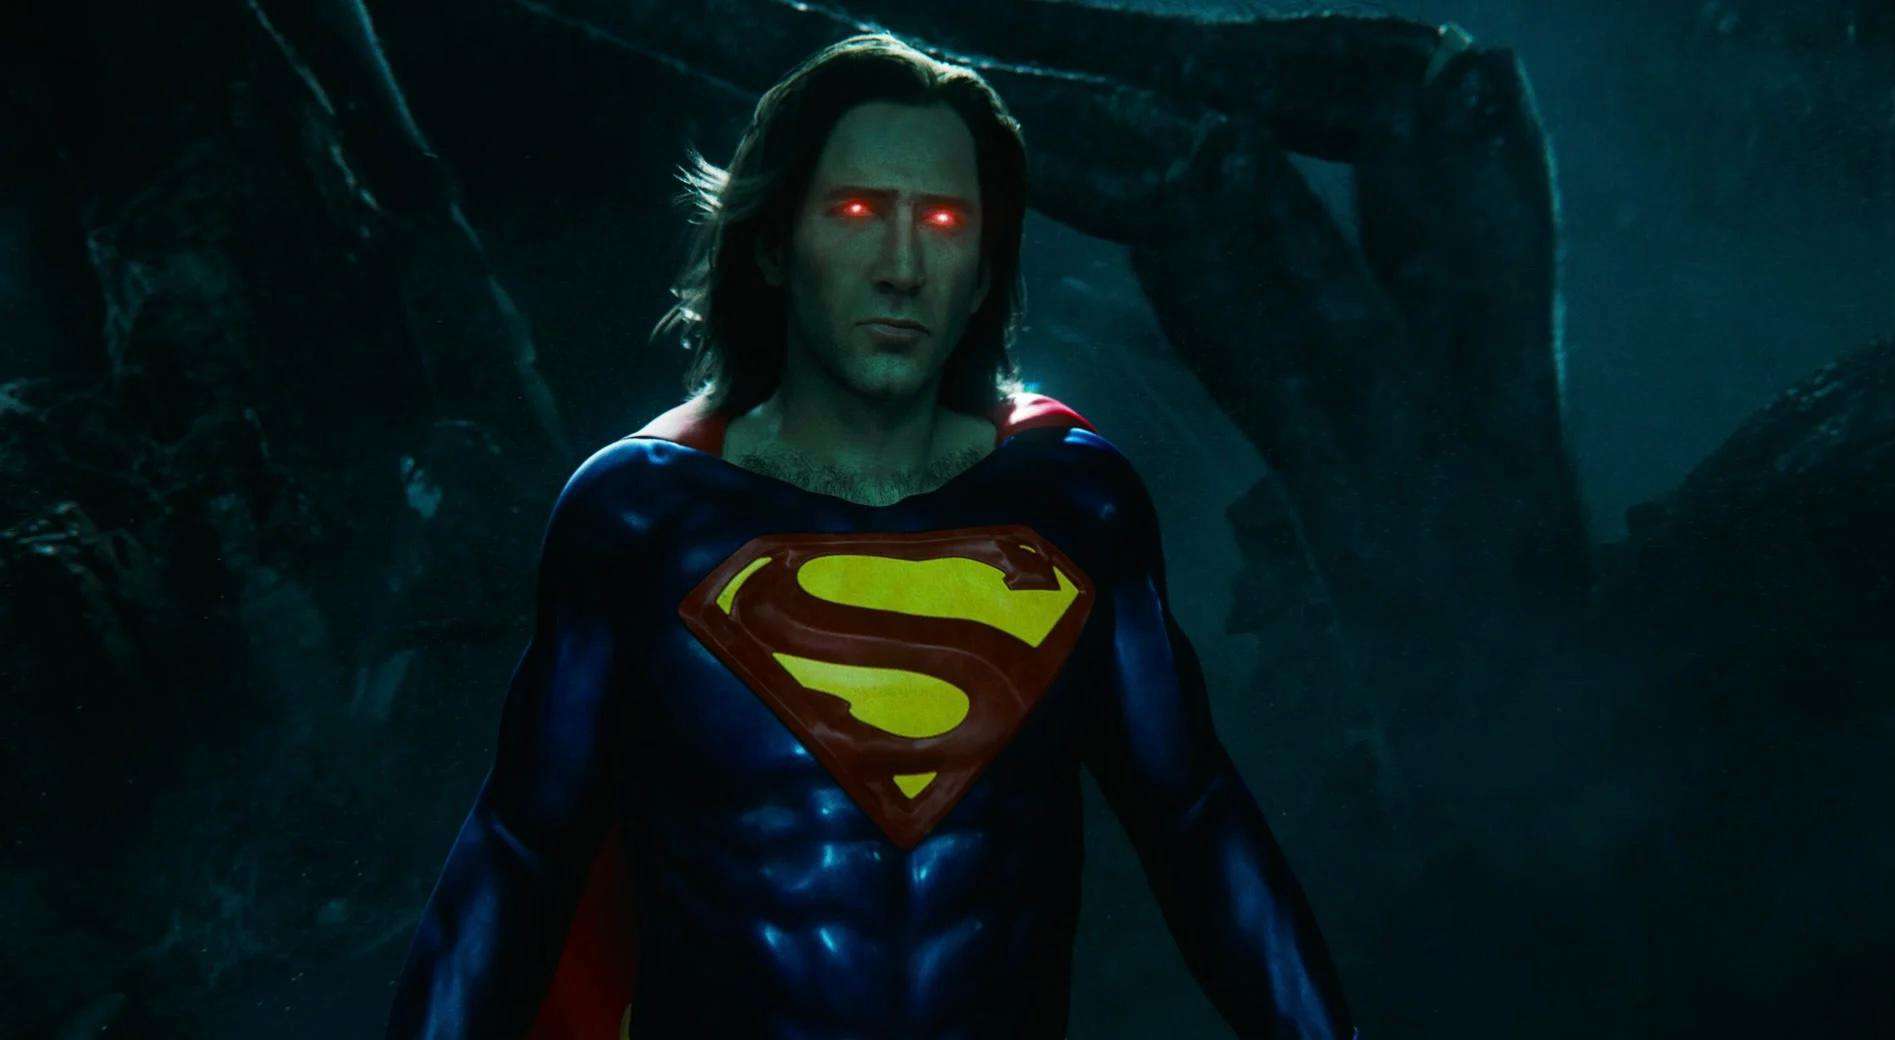 Superman with glowing red eyes in this photo from DC Entertainment